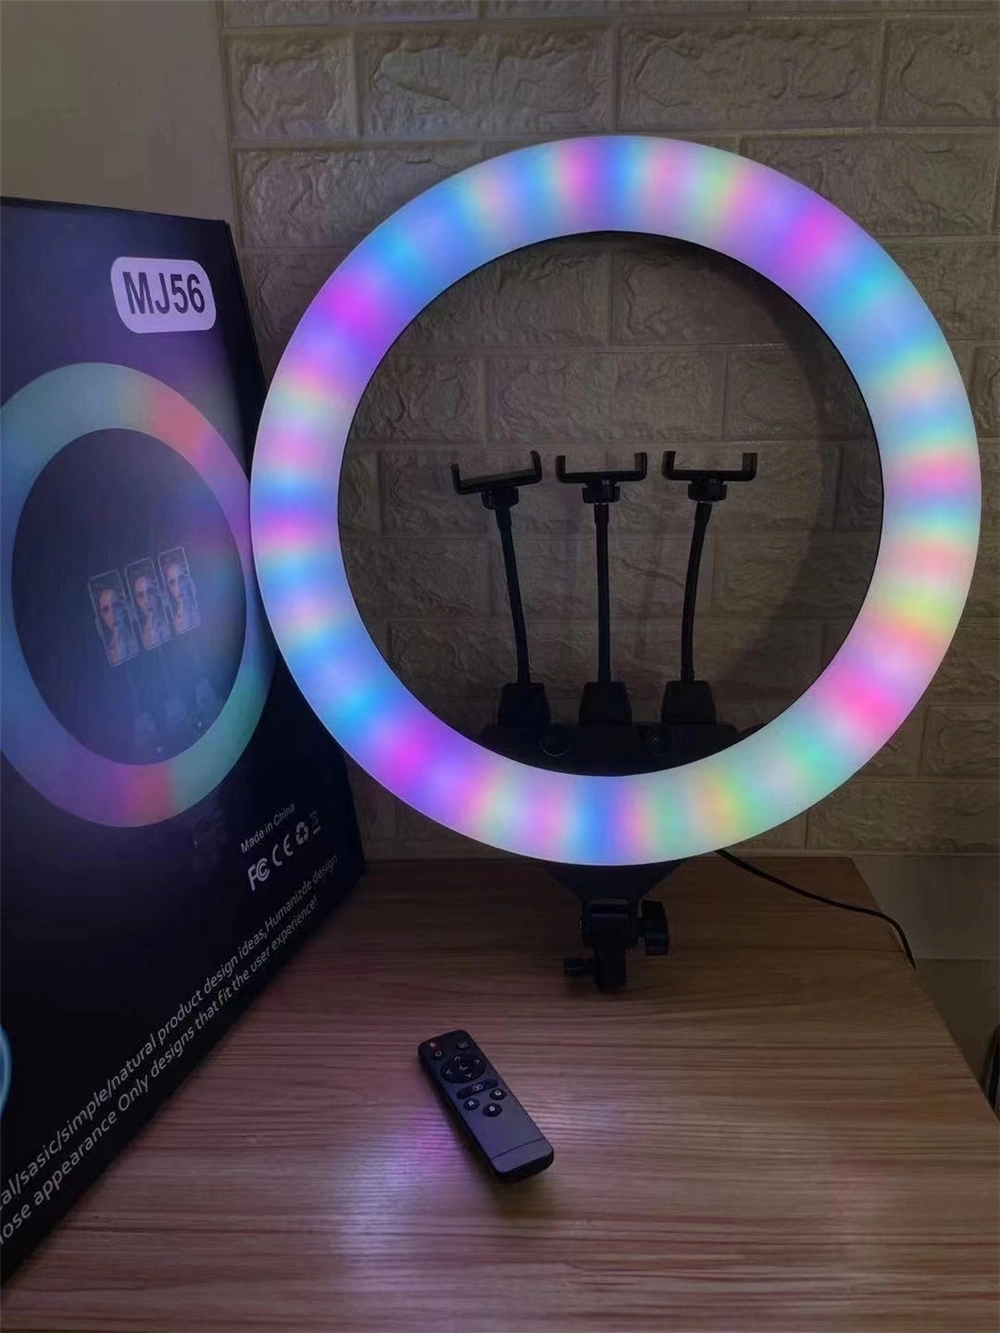 Mj56 22 Inch RGB LED Ring Light with Stand, 60W Dimmable Bi-Color 3200K-5600K CRI 95+ with Special Scenes Effect for Video